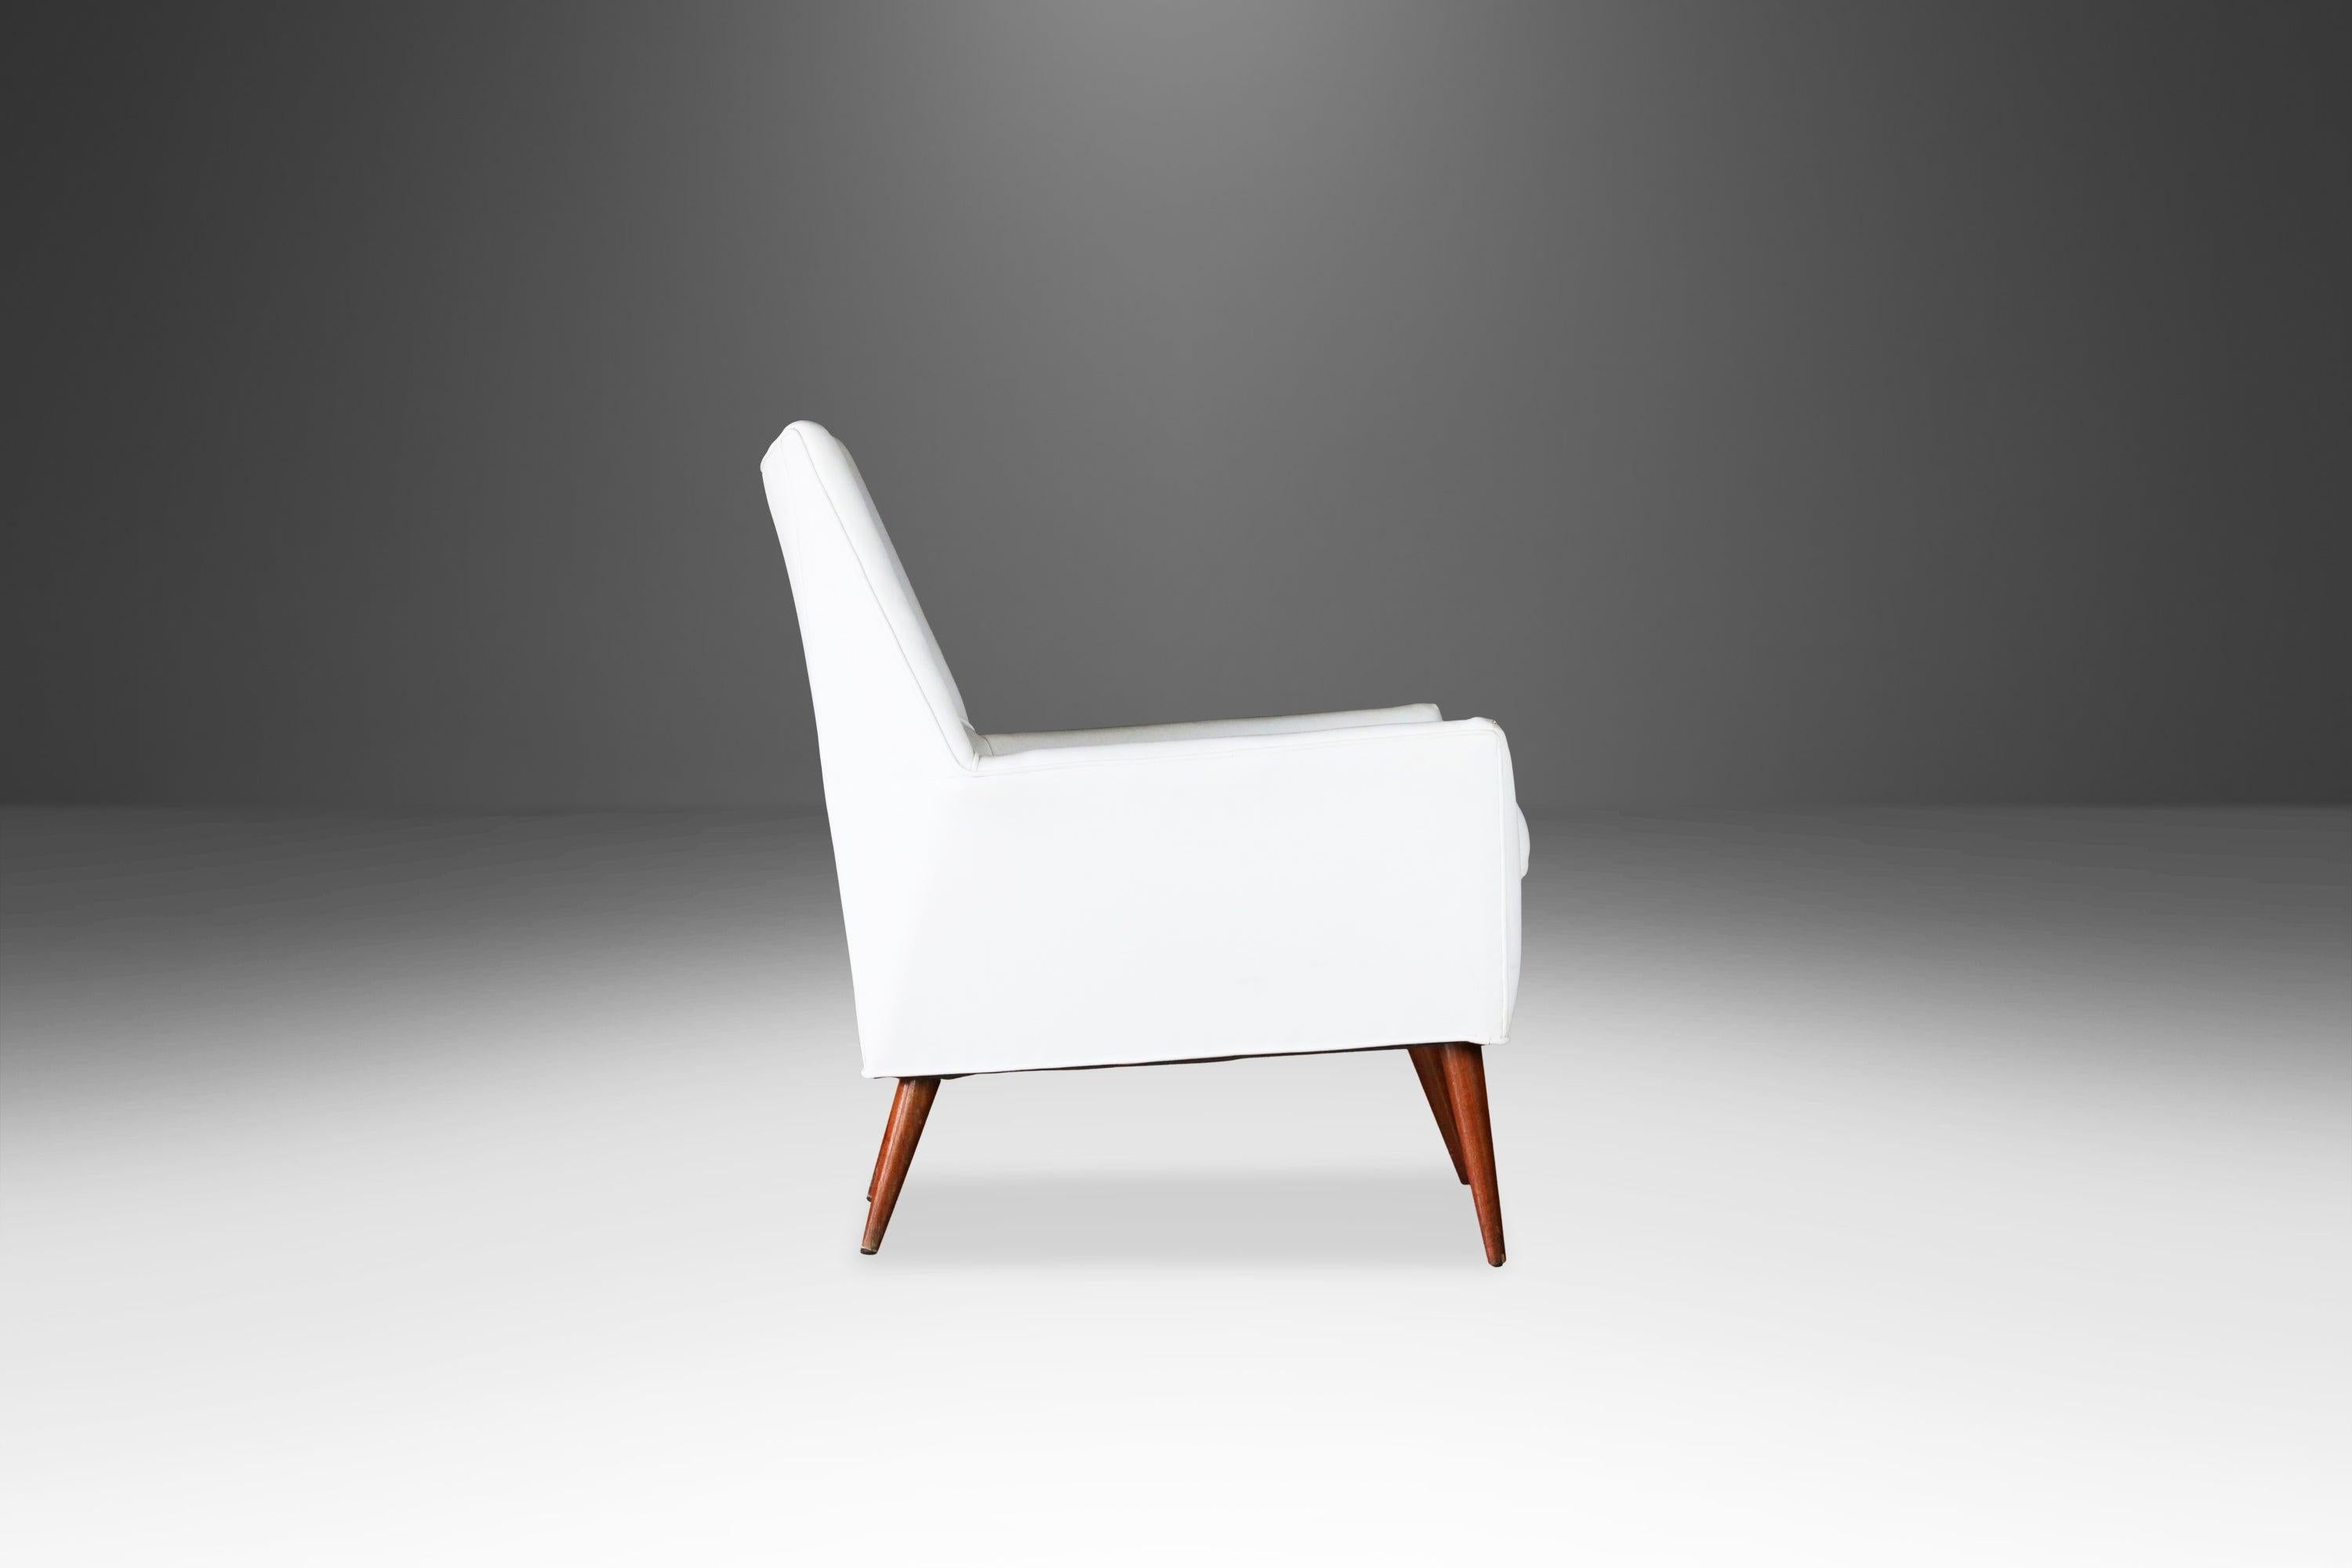 Designed by the visionary Paul McCobb in 1957 the model 3042 “Squirm” lounge chair is an archetypal example of early American Modern design. Featuring the original white leather on a wood and spring frame with turned wood cone-shaped legs this